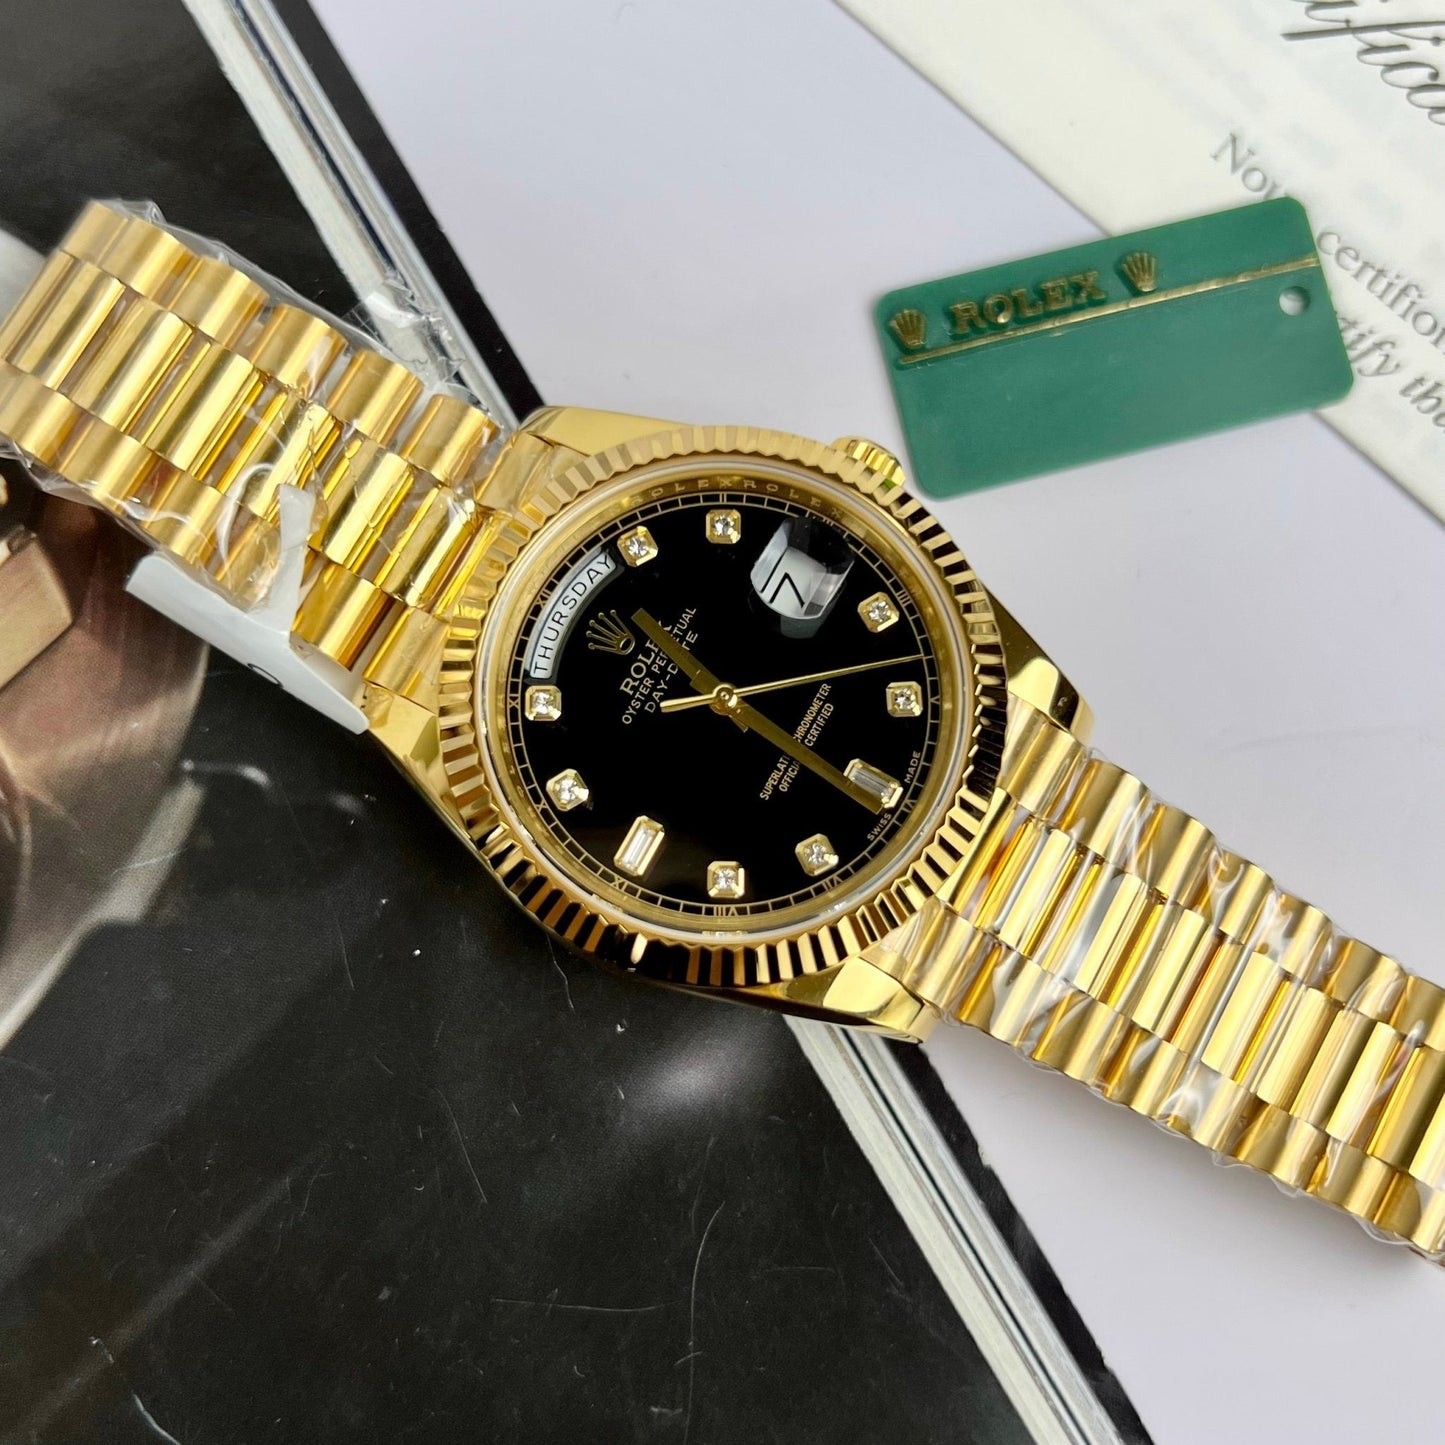 Rolex Day-Date 36 Gold Watch 118238-0111 Gold Filled 18k with 153 gram from GM Factory